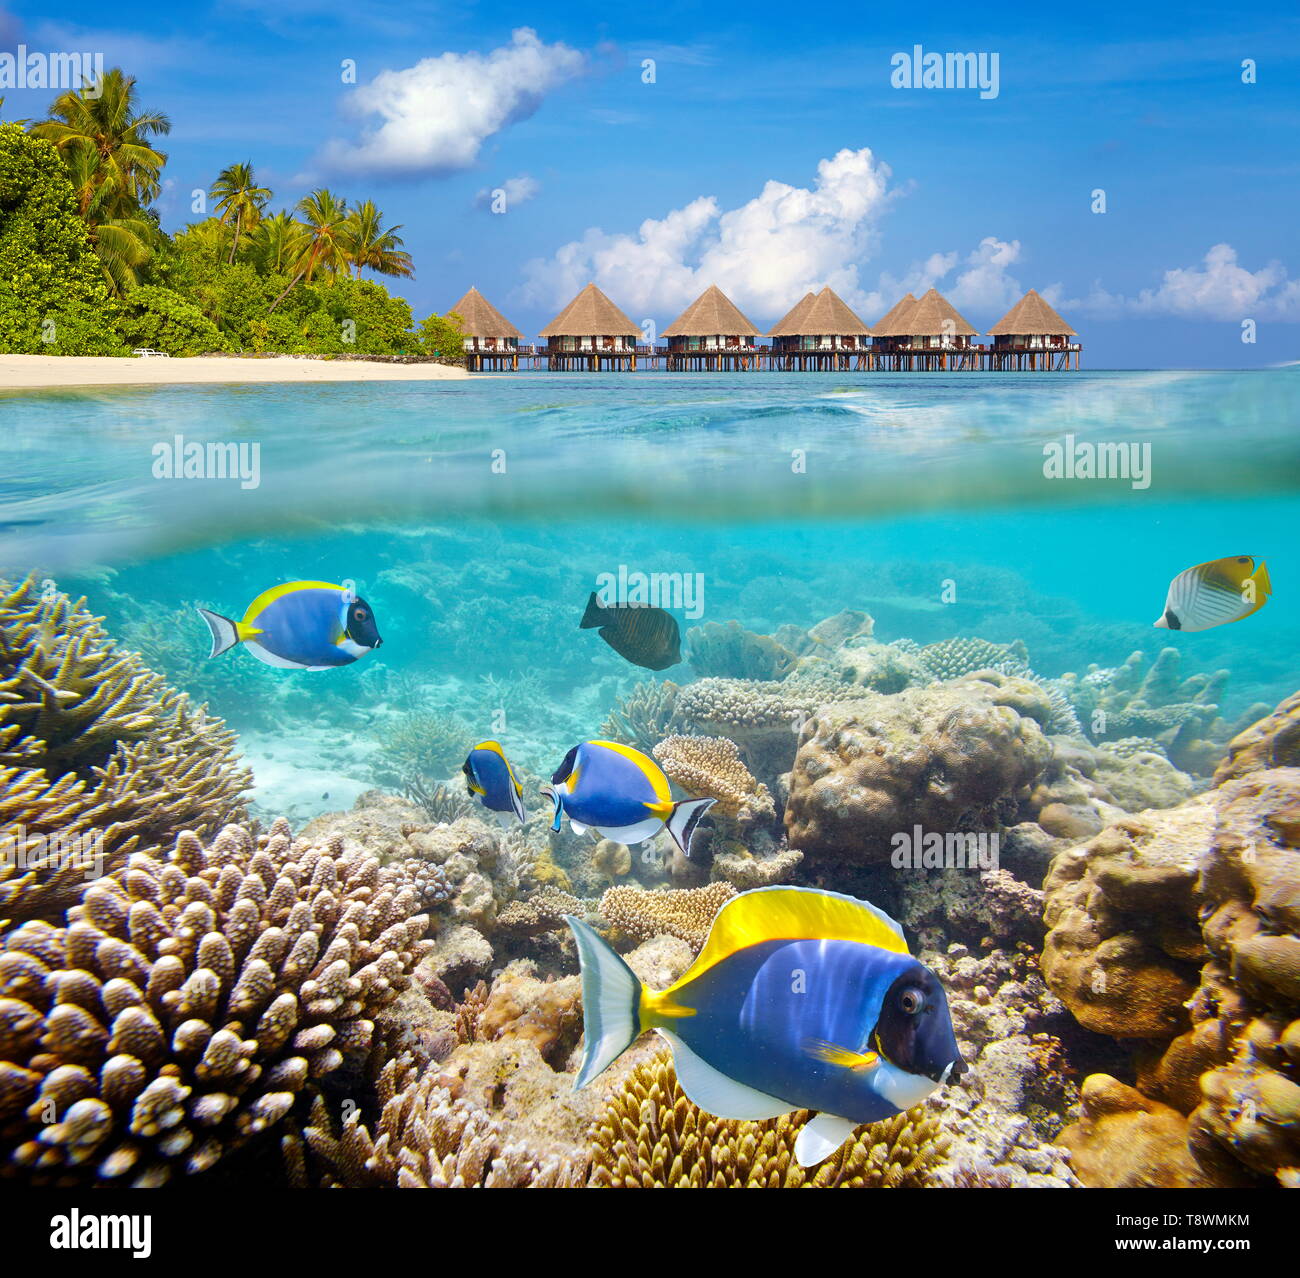 Maldives Islands, underwater view at tropical fishes and reef Stock Photo